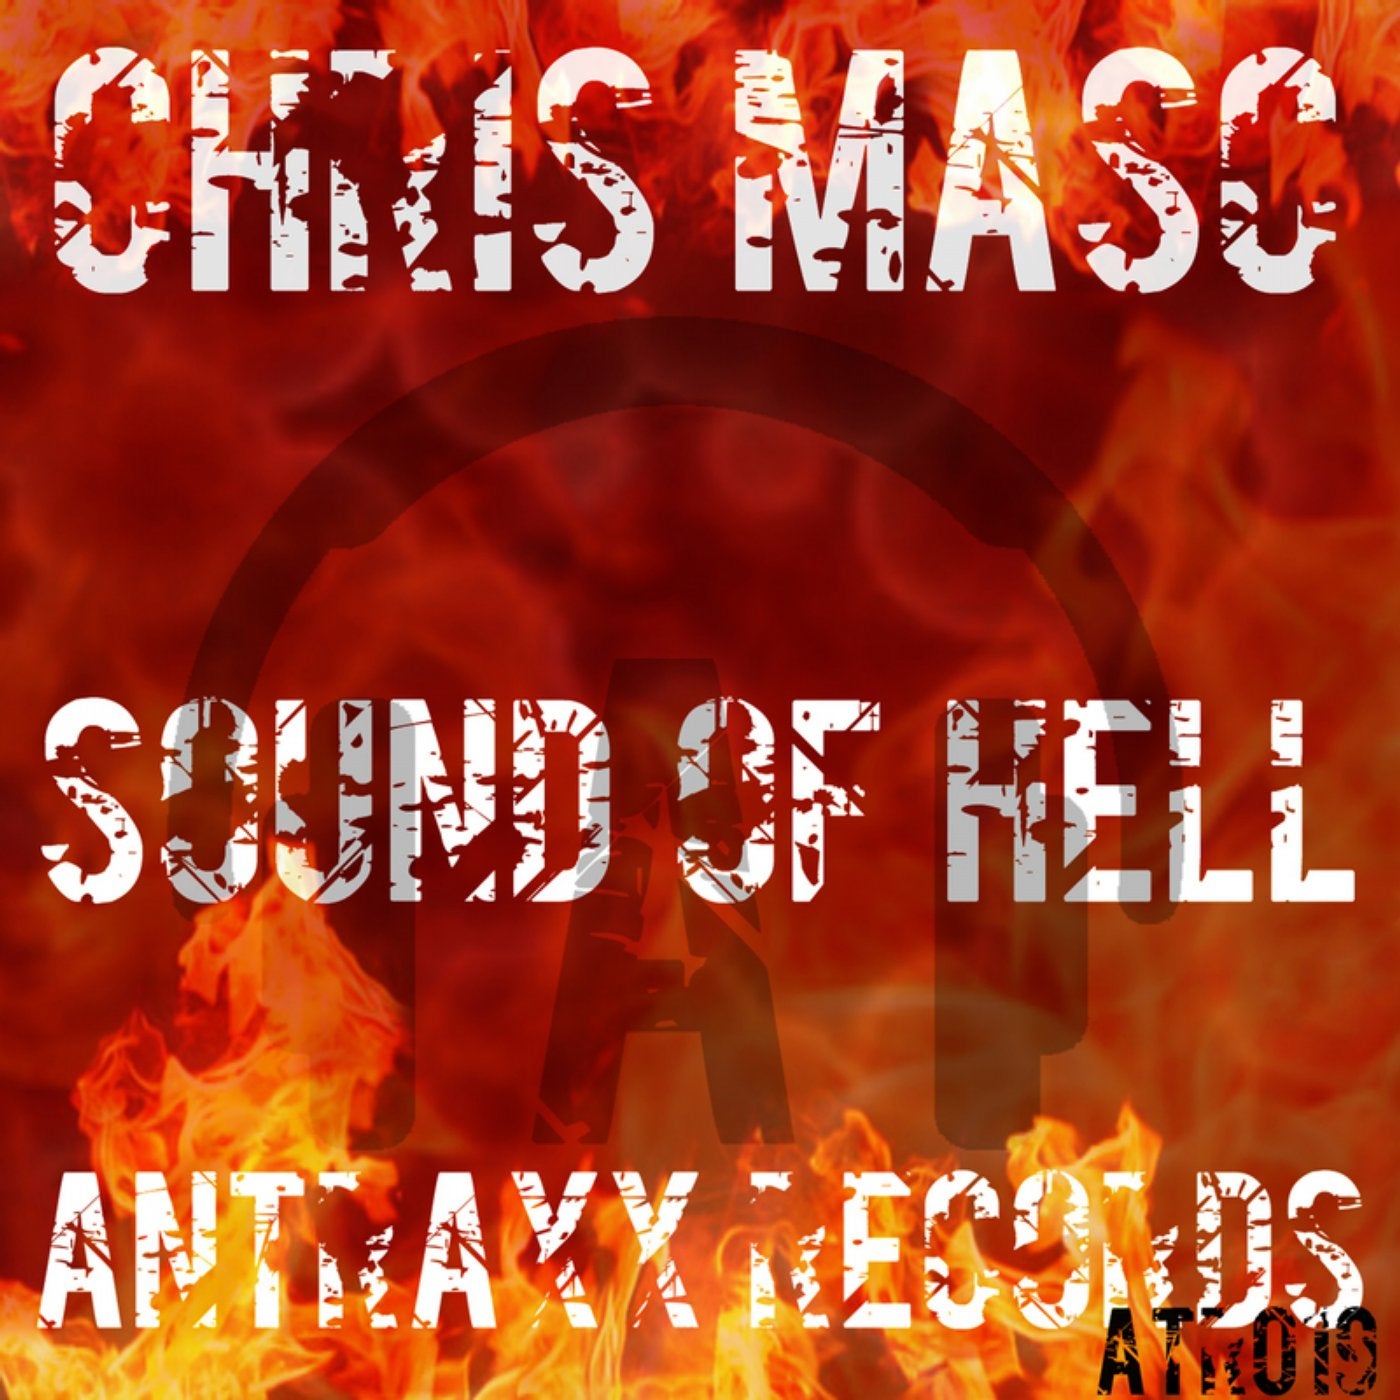 Sound of Hell